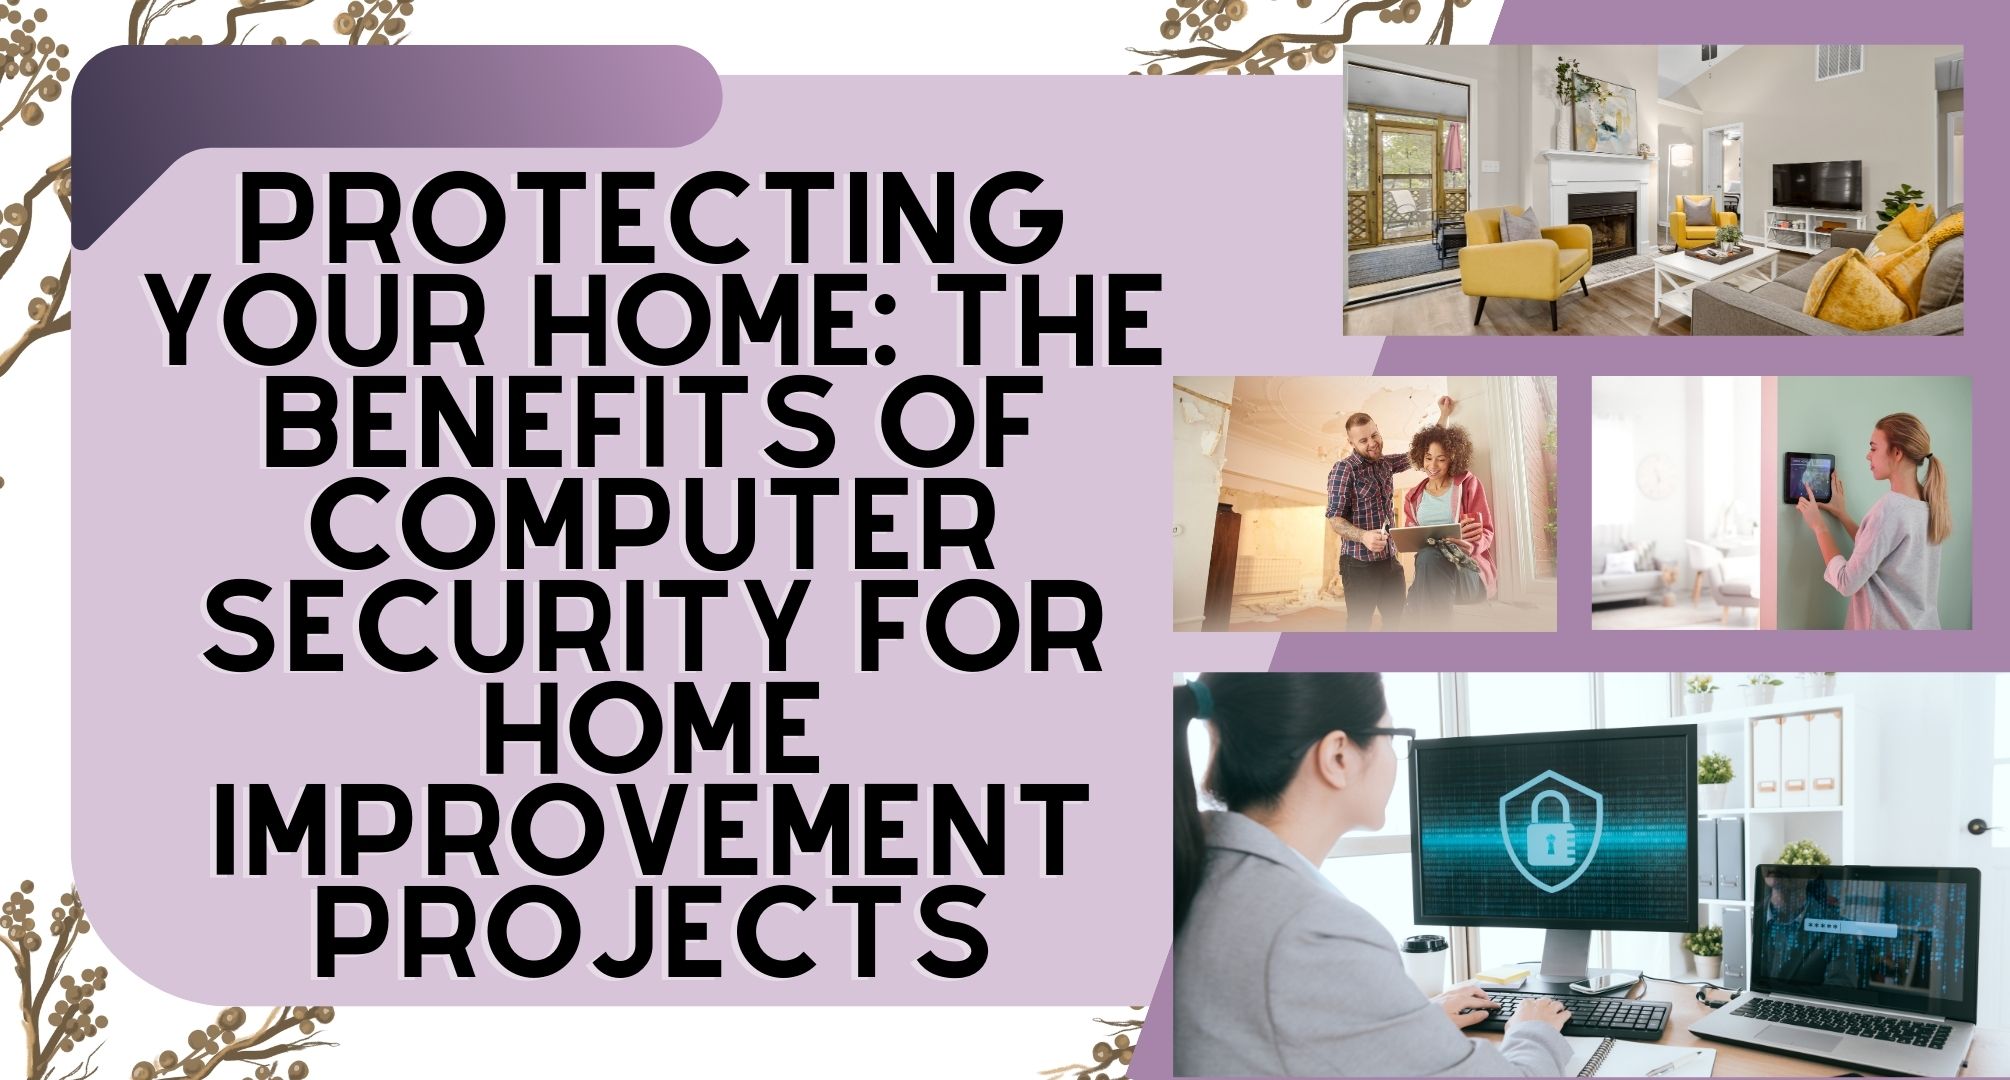 Protecting Your Home: The Benefits of Computer Security for Home Improvement Projects